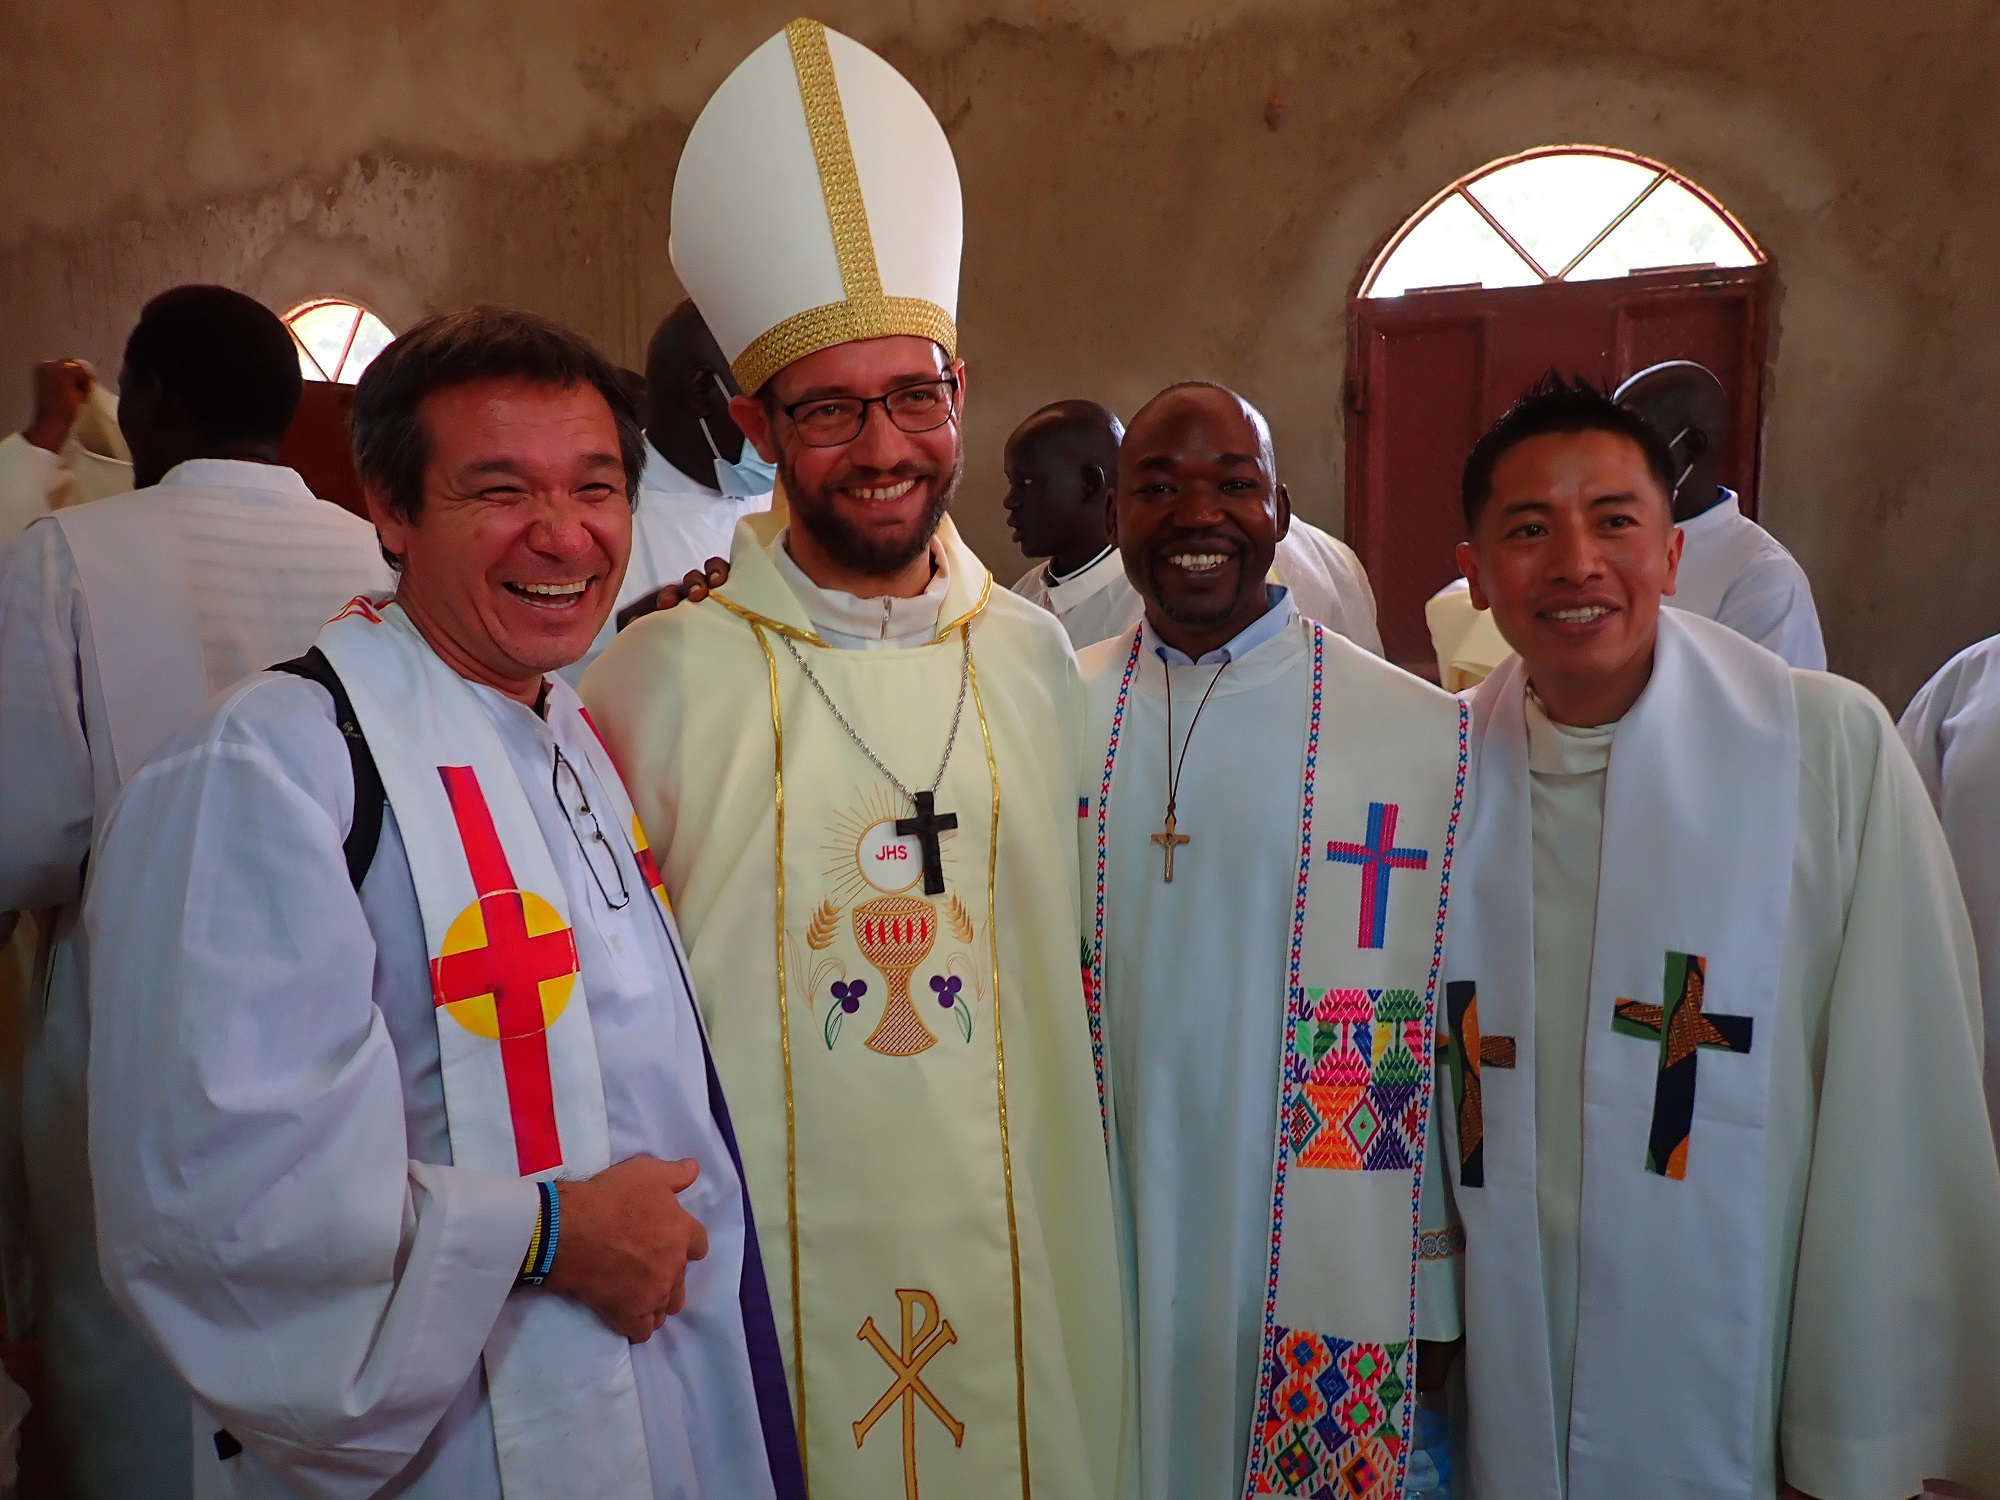 Fr Gregor, Bishop Christian and another priest stand together in their priestly outfits